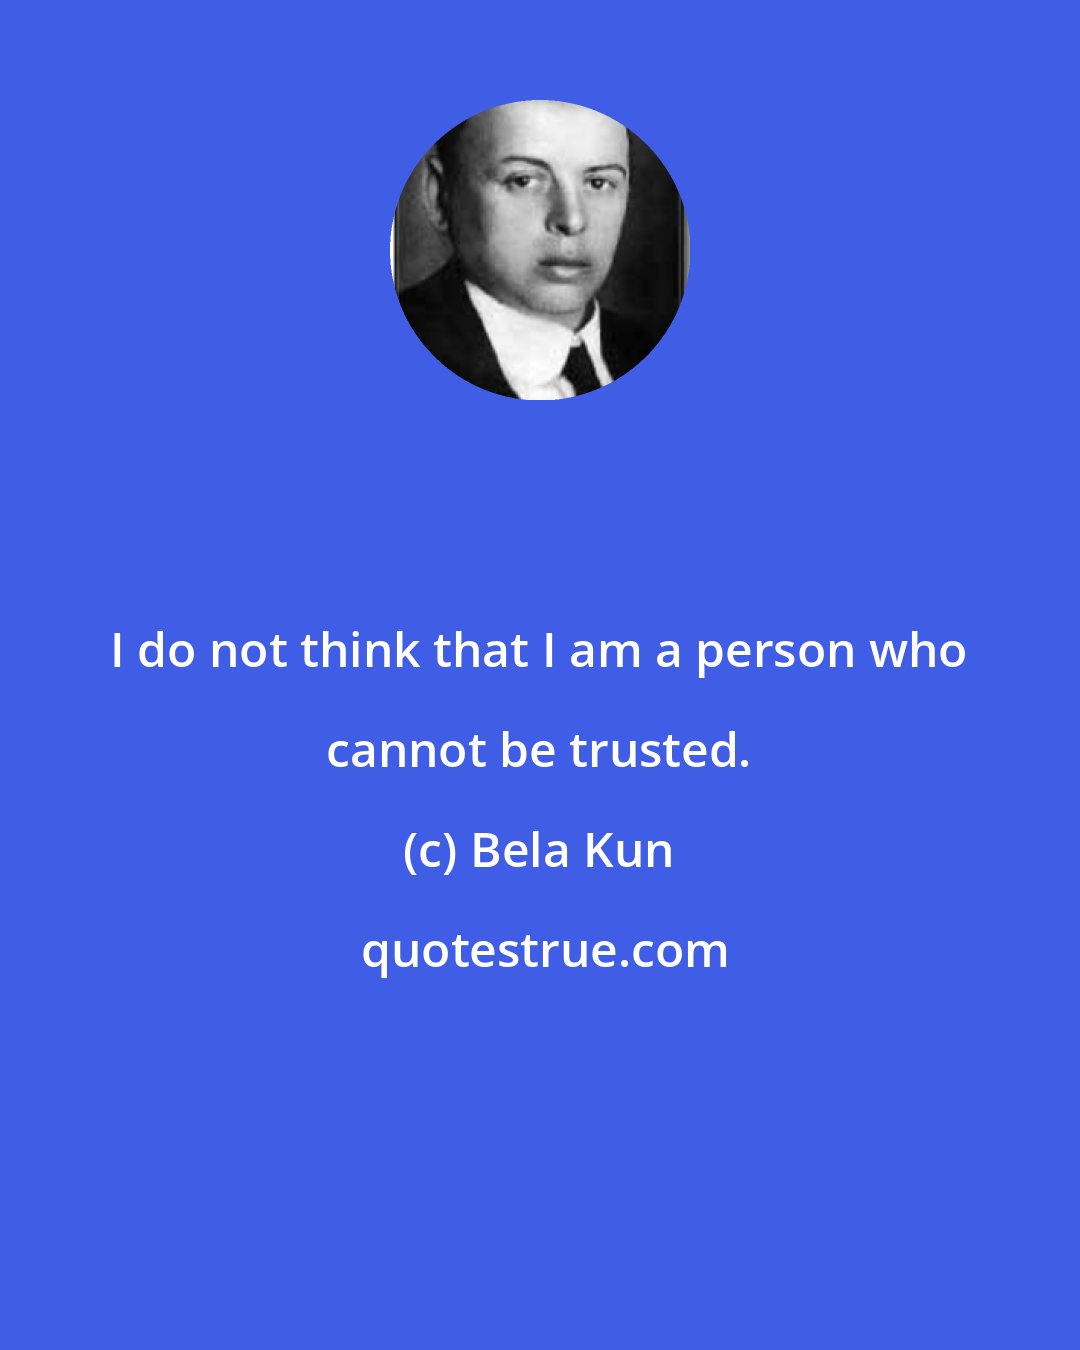 Bela Kun: I do not think that I am a person who cannot be trusted.